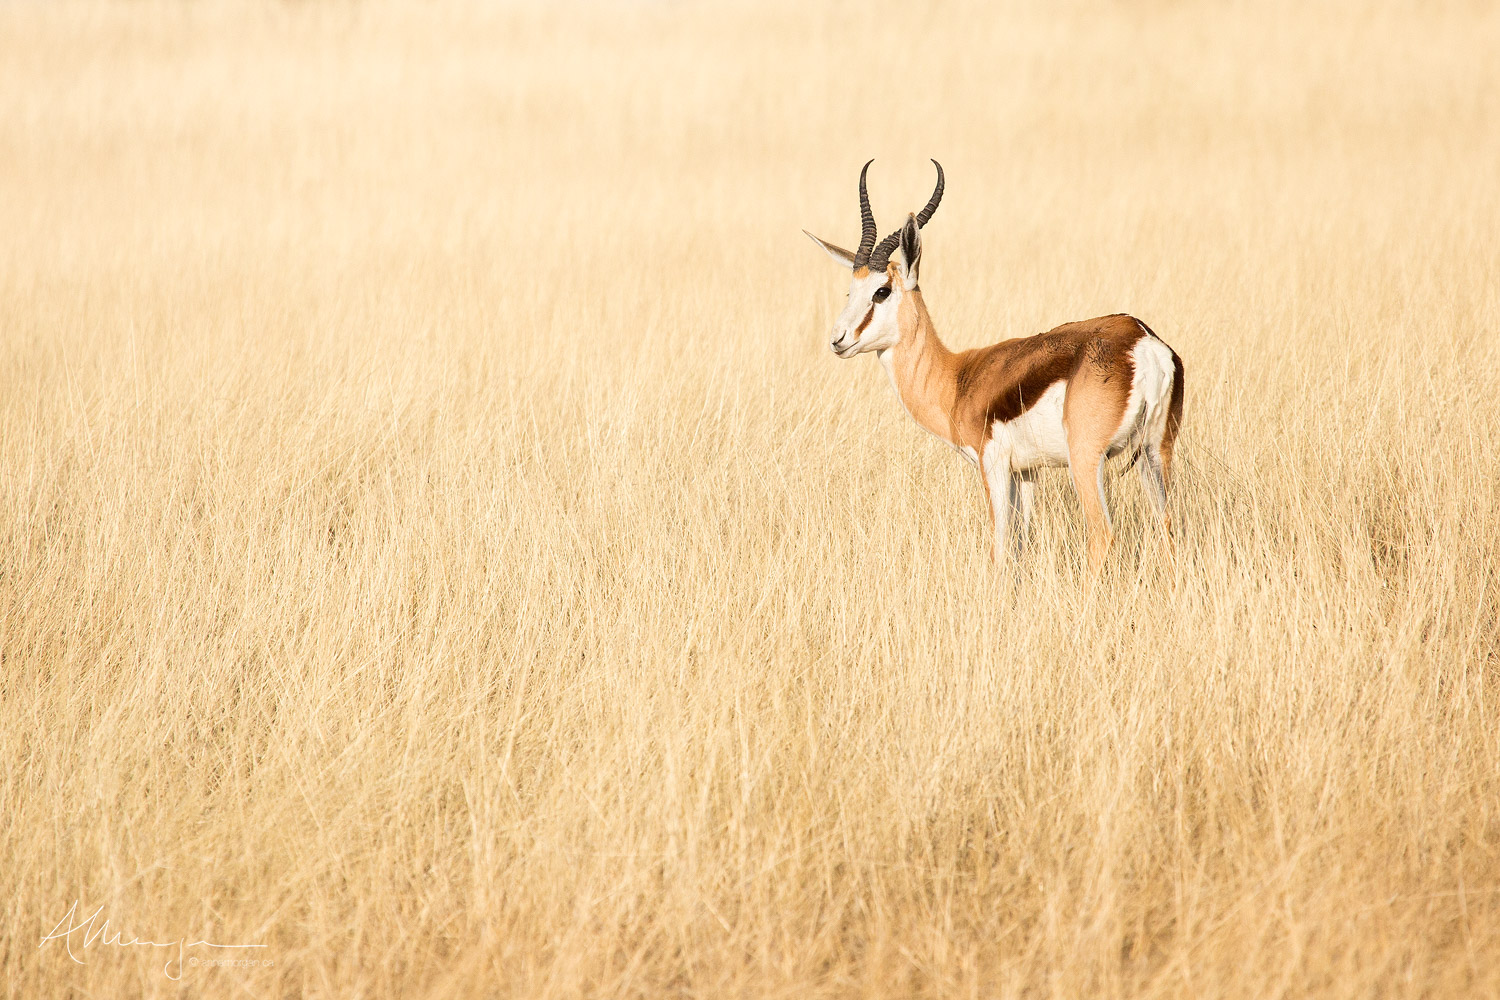 A Springbok stands quietly in the arid grasslands of the Kalahari Desert in Namibia.